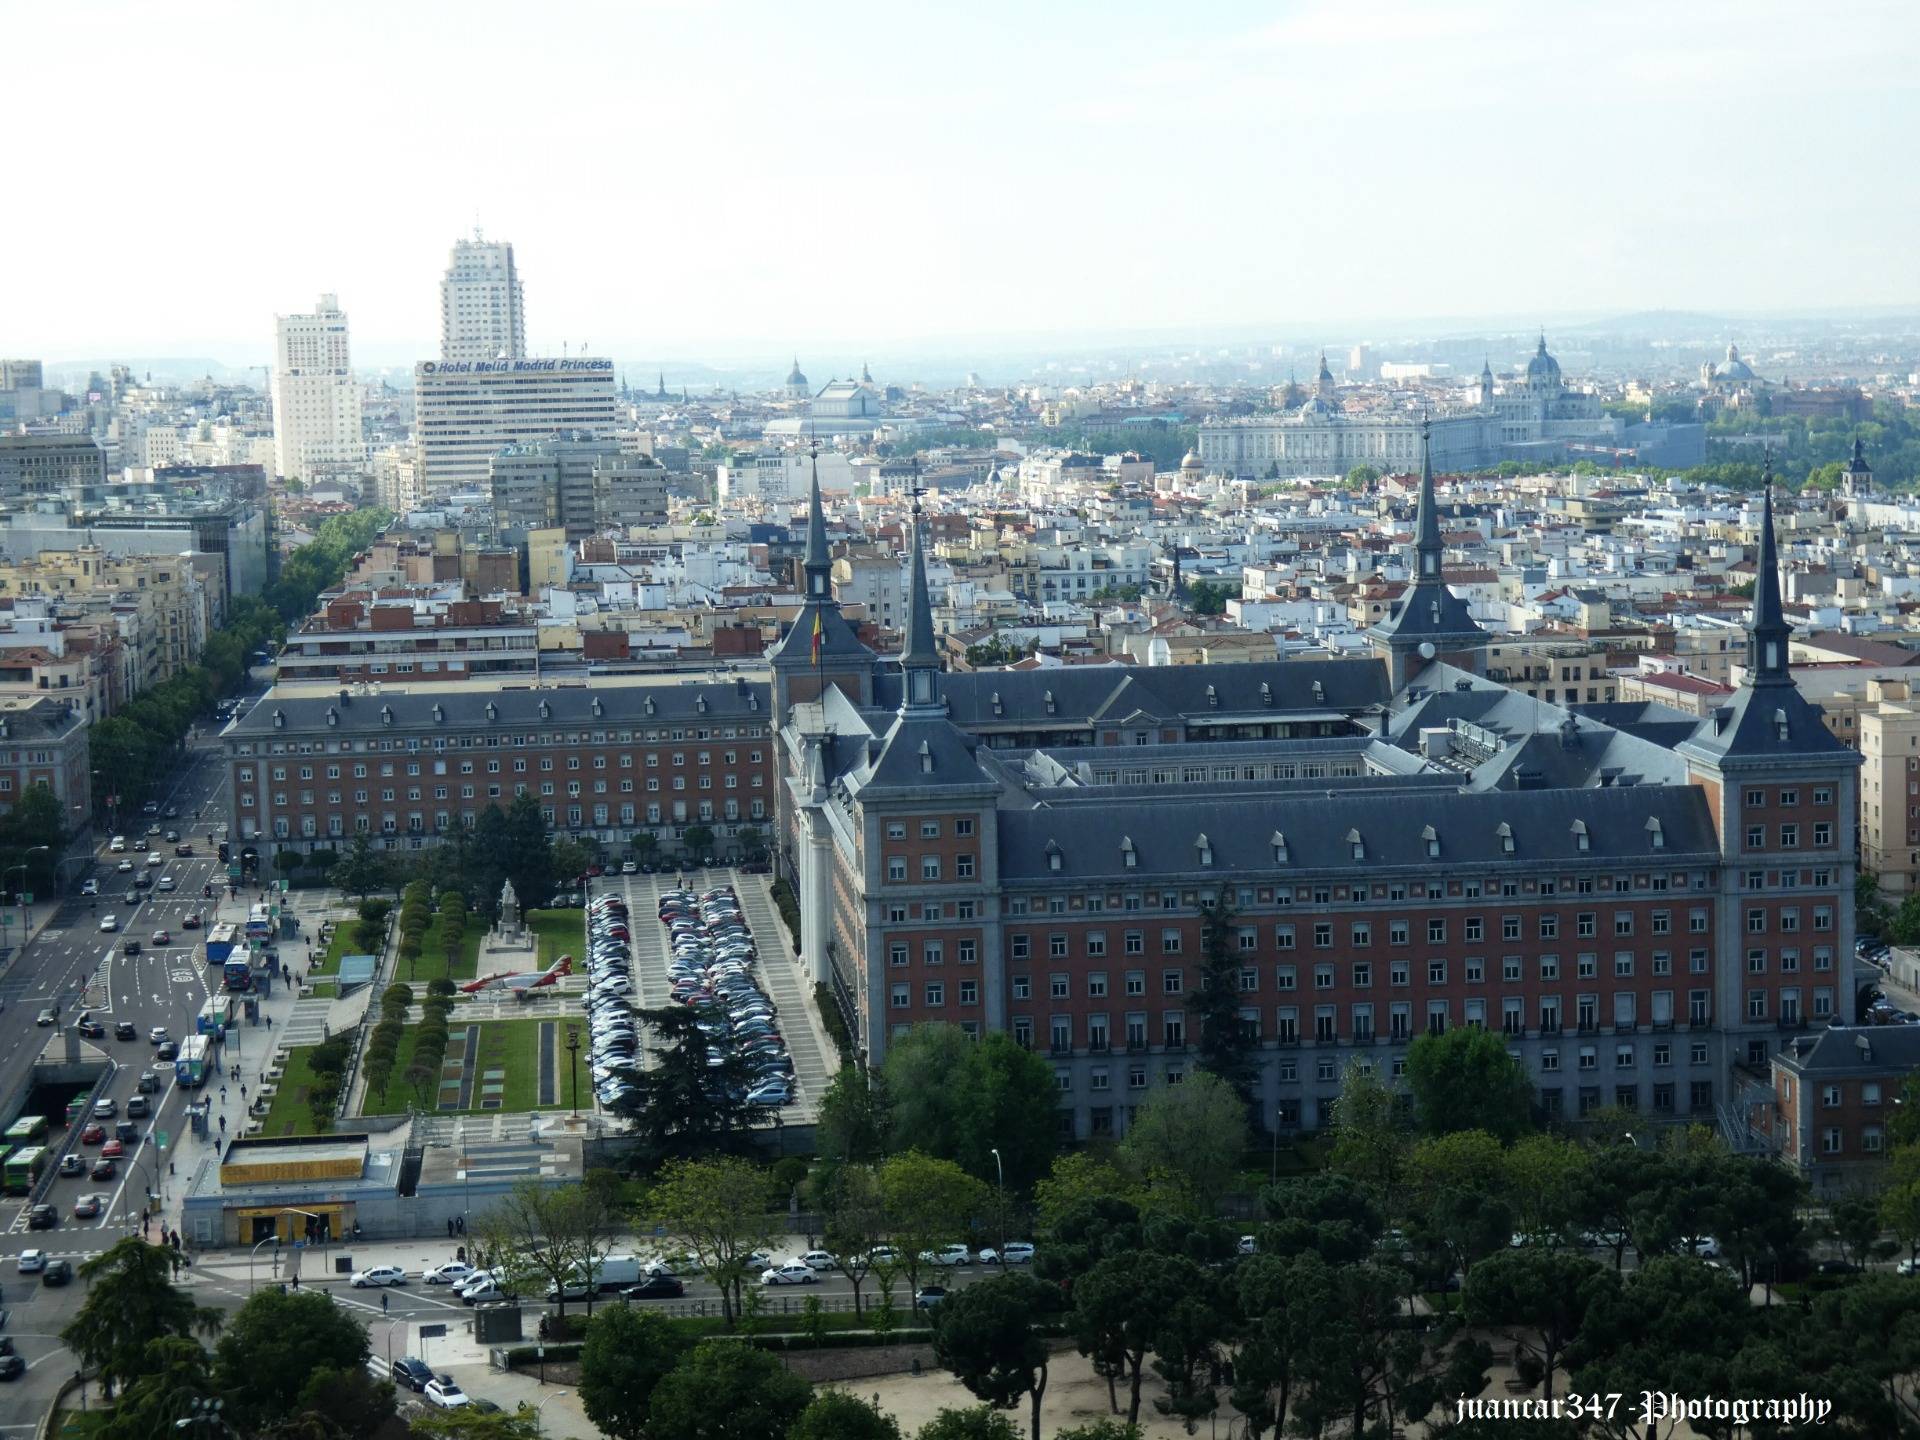 In the first place the Ministry of Air. In the background: the Meliá hotel, the Torre de Madrid and the Ríu hotel